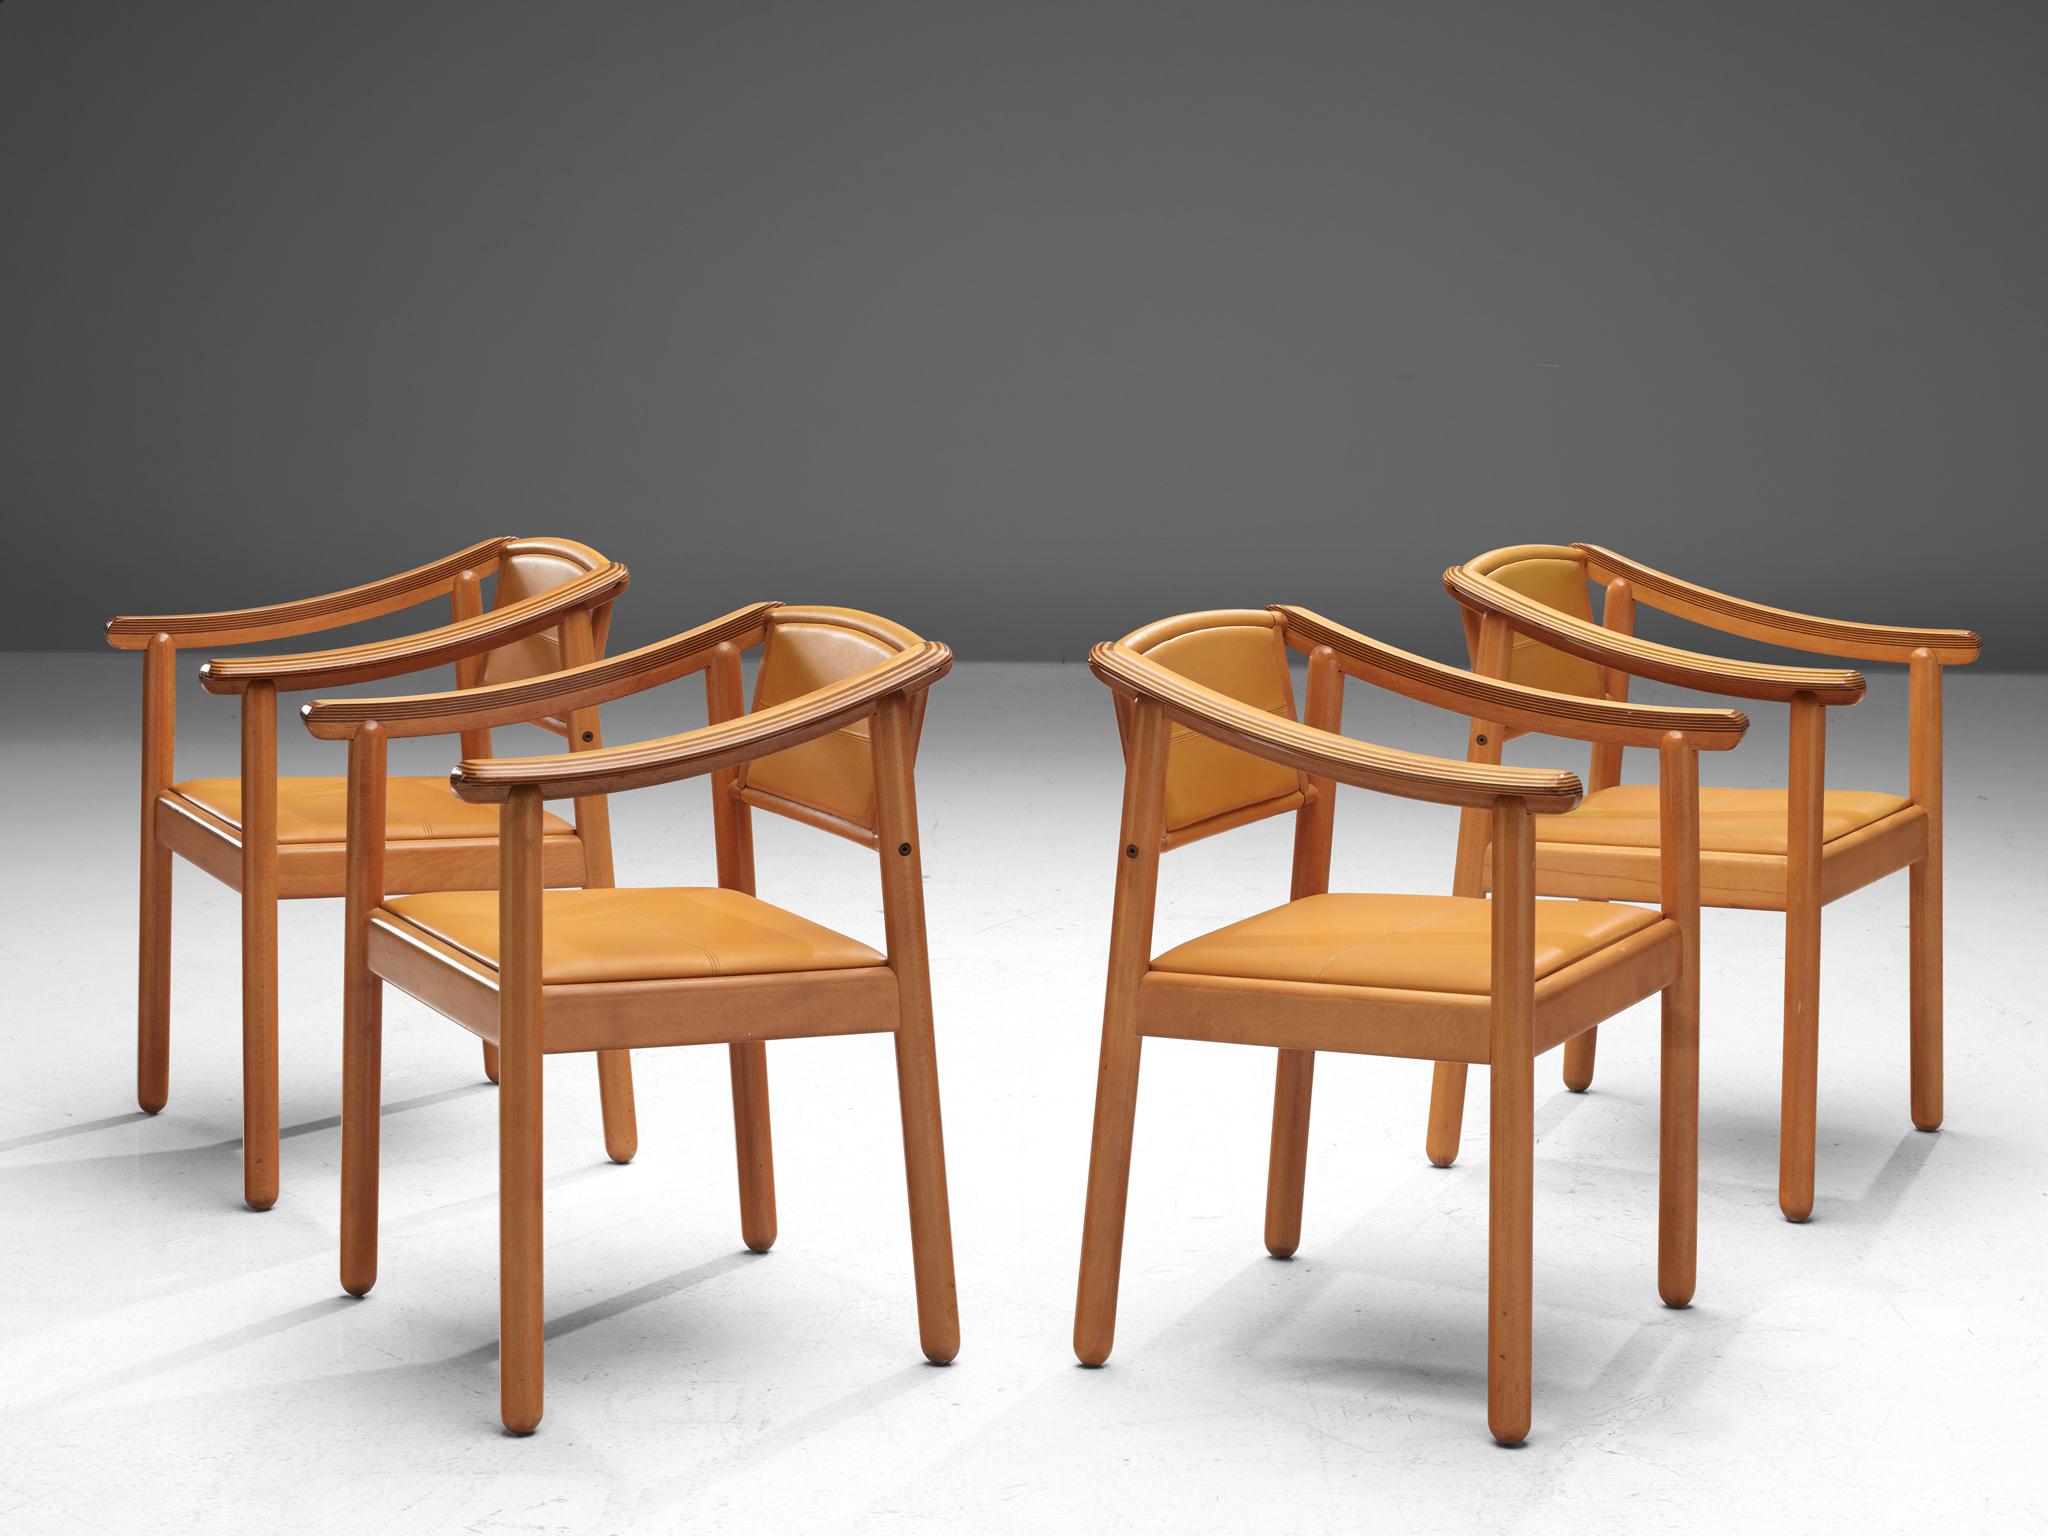 Afra & Tobia Scarpa for Maxalto, set of four dining chairs 'Artona', leather and wood, Italy, 1970s

Set of four Artona armchairs by the Italian designer couple Afra and Tobia Scarpa. The Artona line by the Scarpa duo was in fact the first line ever